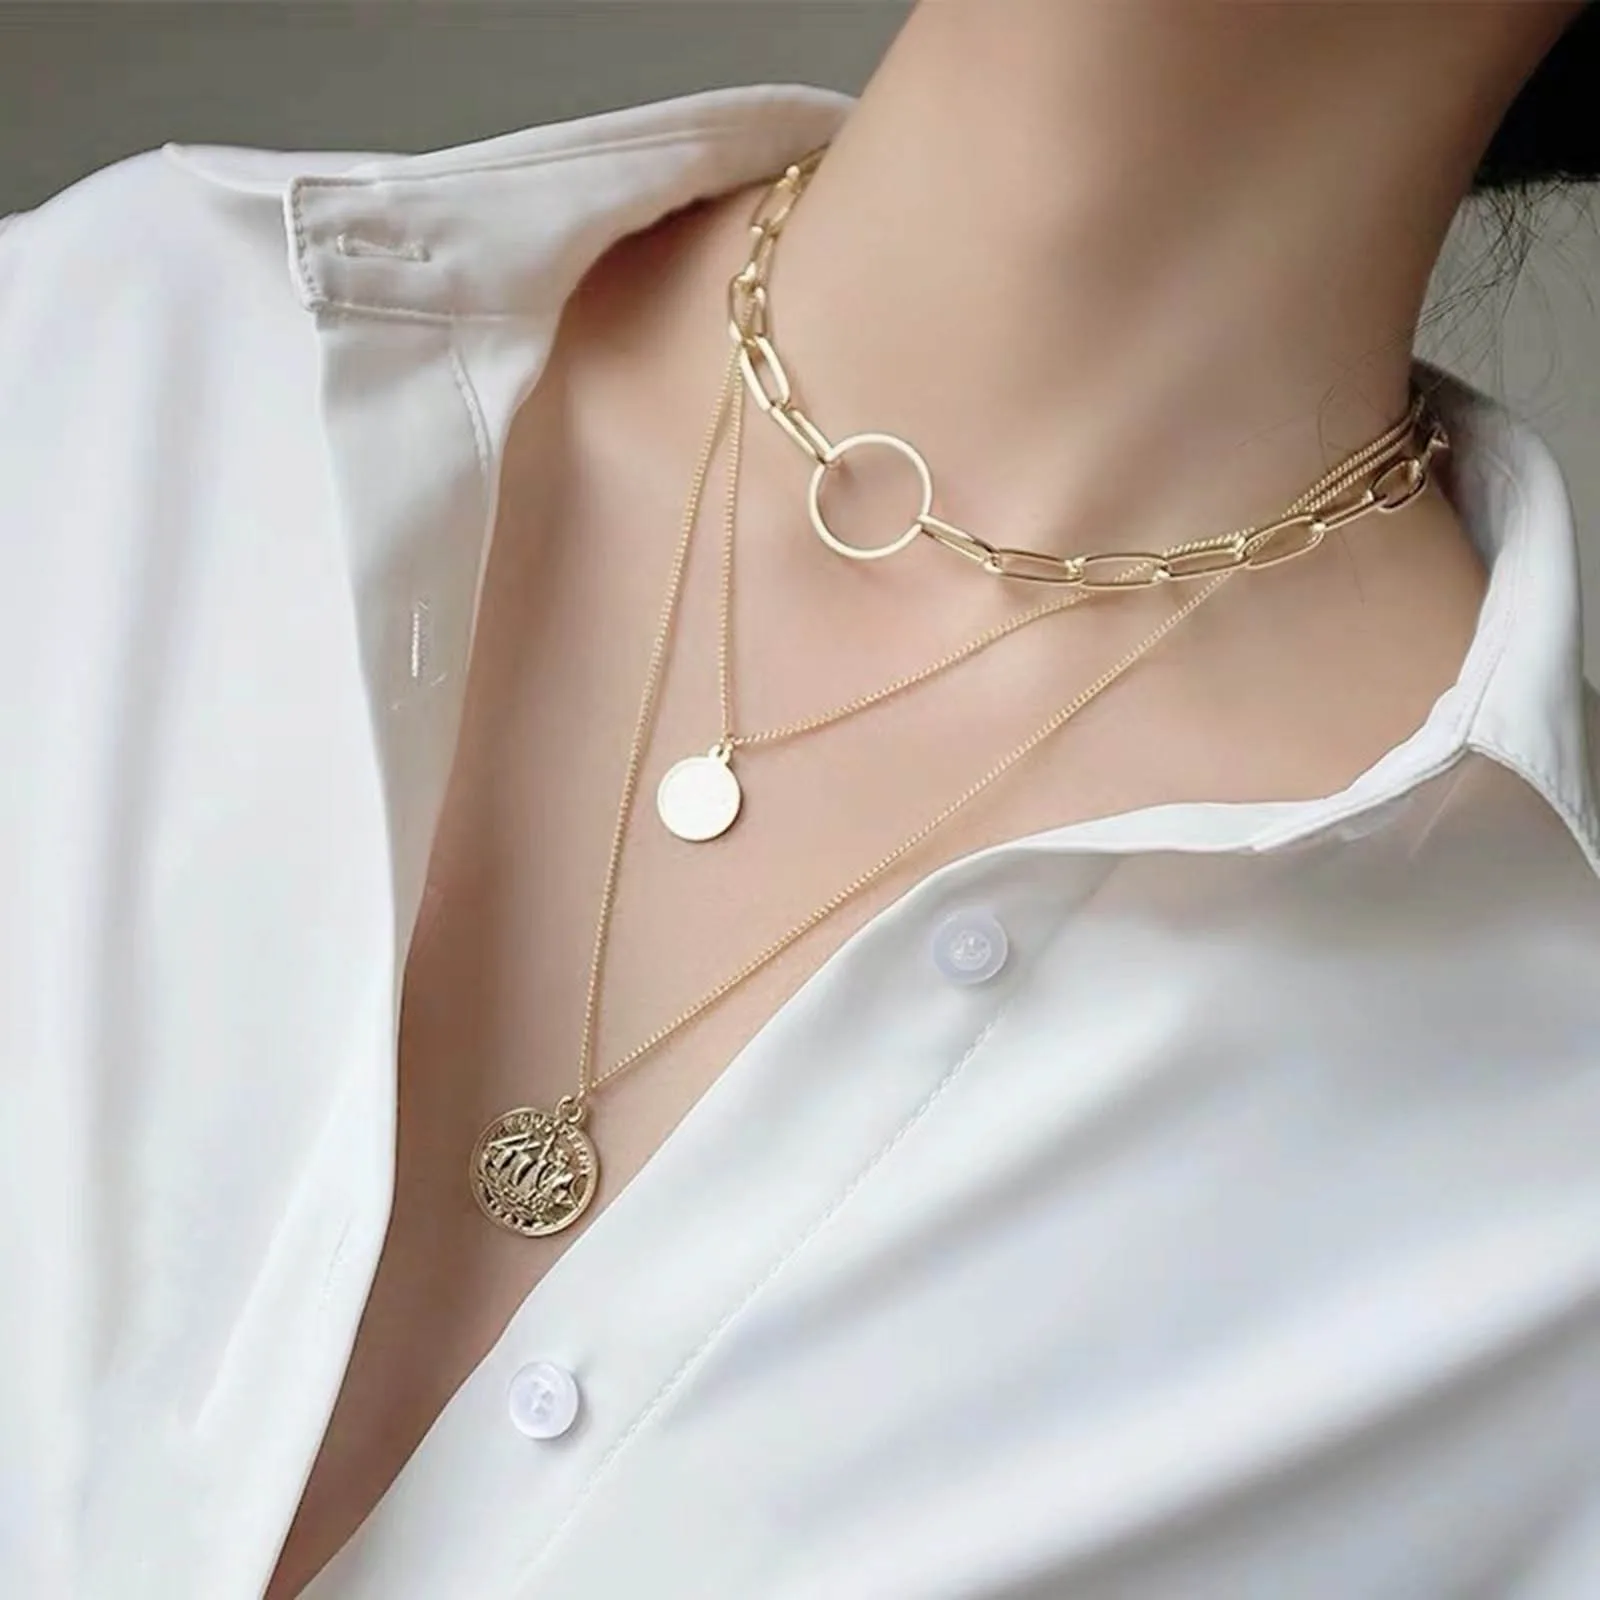 

Multilayer Layered Necklace Gold/Silver Color Metal Round Head Portrait Pendants Link Chains Women Party Club Collar Jewelry,1PC